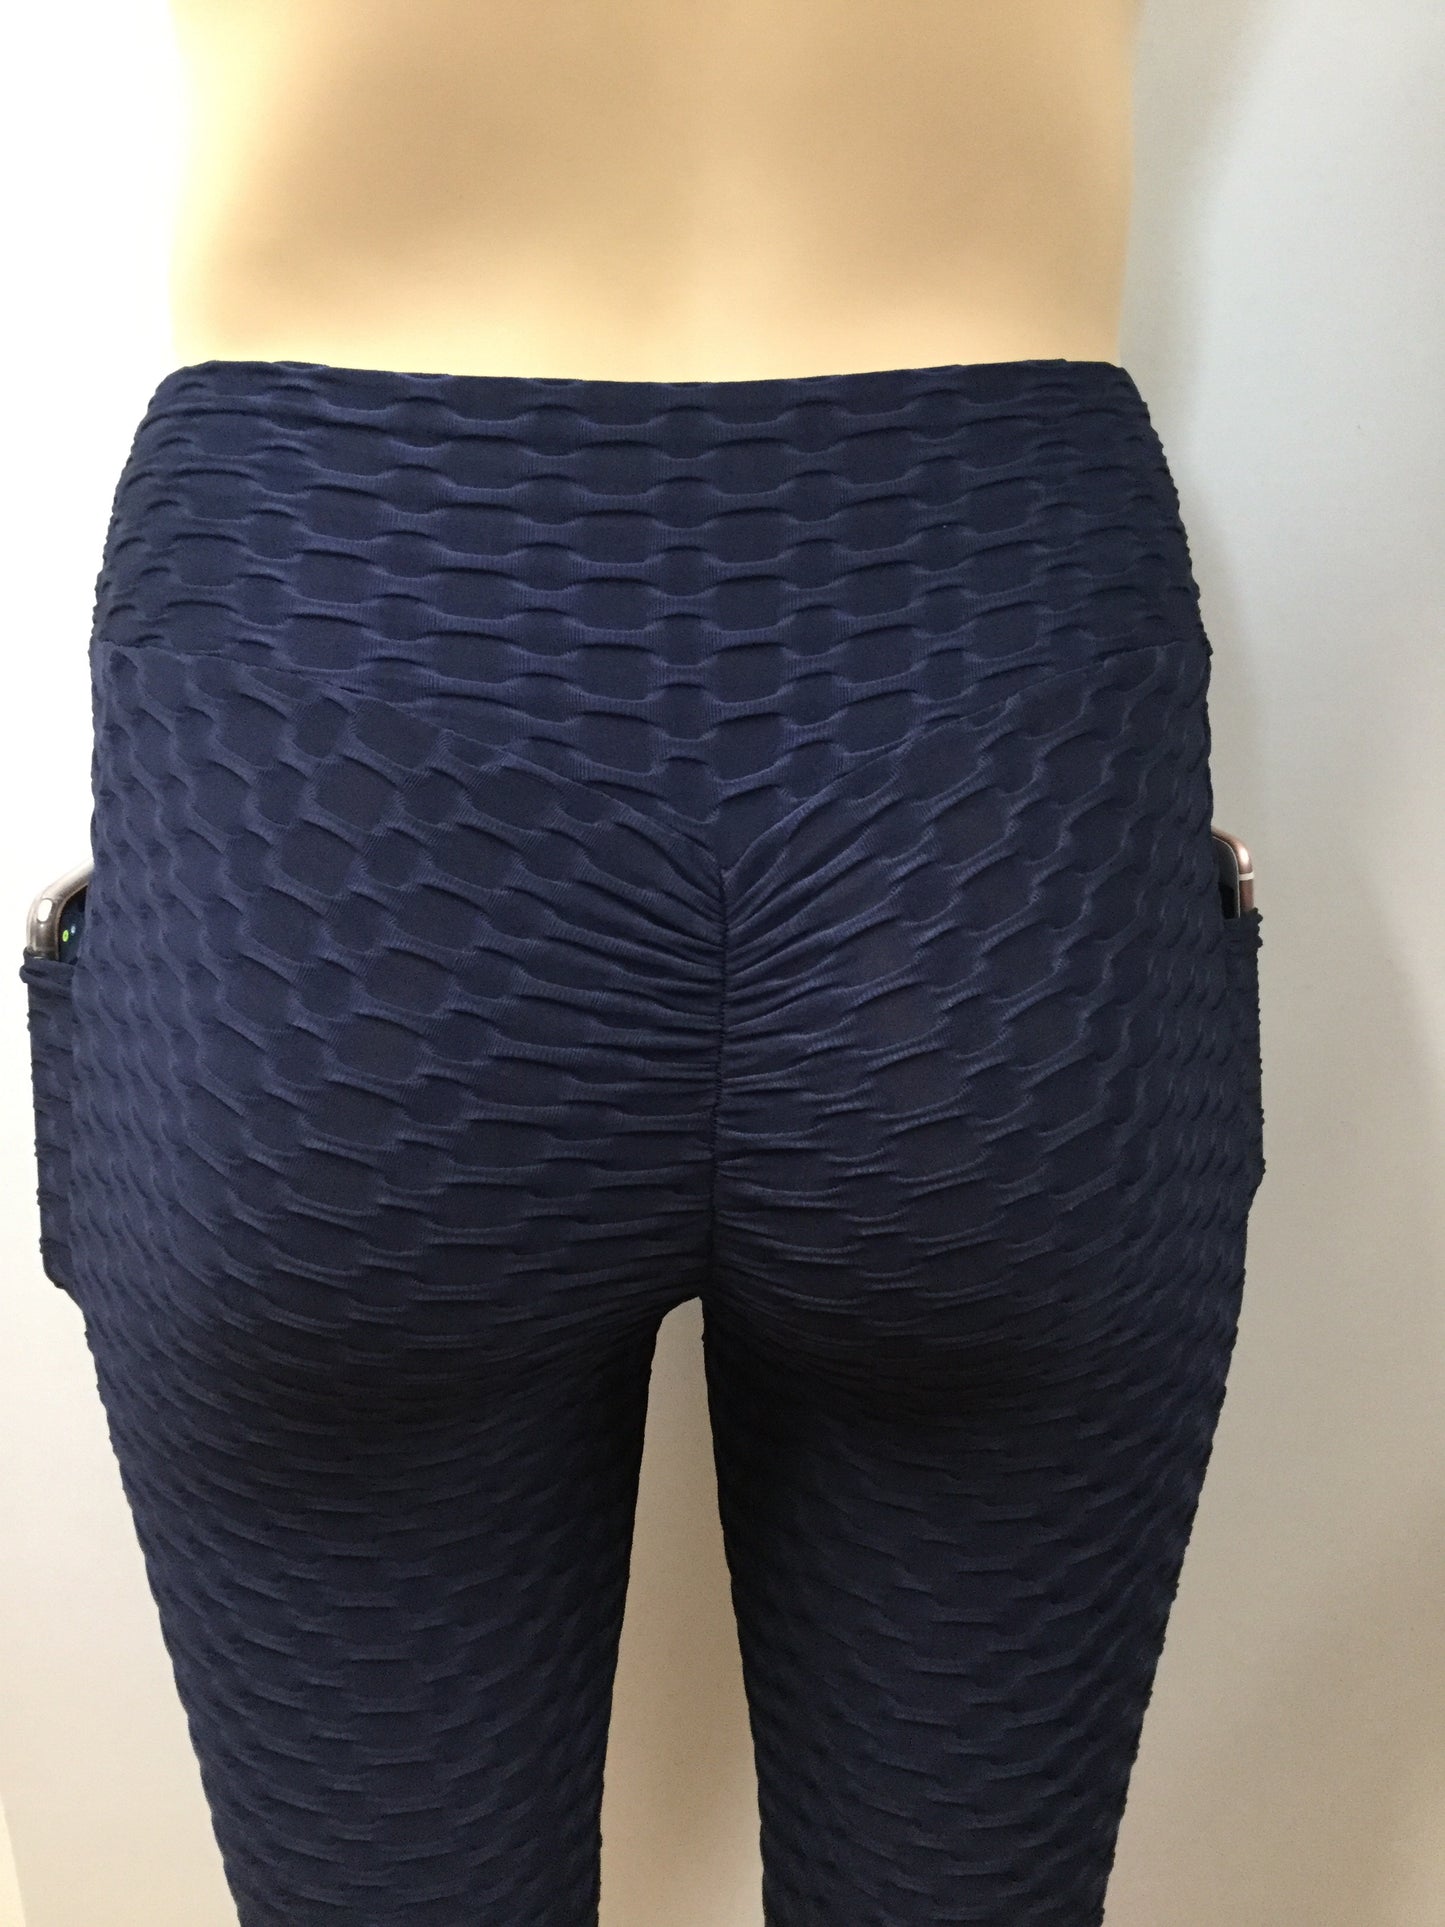 Textured Honeycomb Navy Leggings with pockets